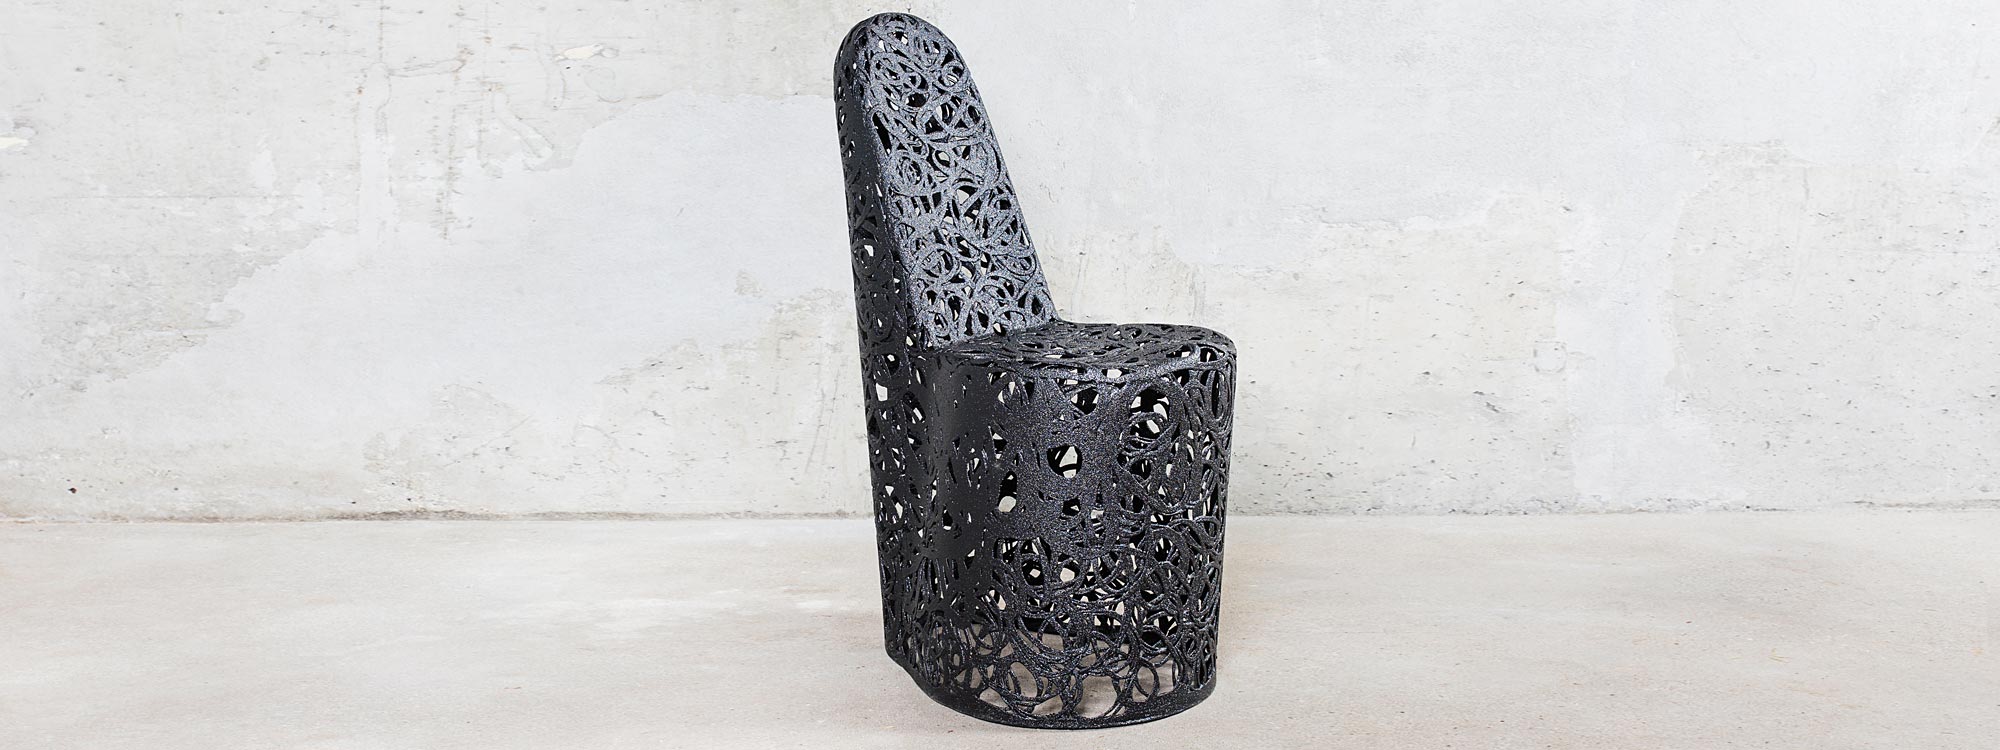 Image of Only basalt garden chair in black Bulletliner finish by Unknown Nordic outdoor furniture